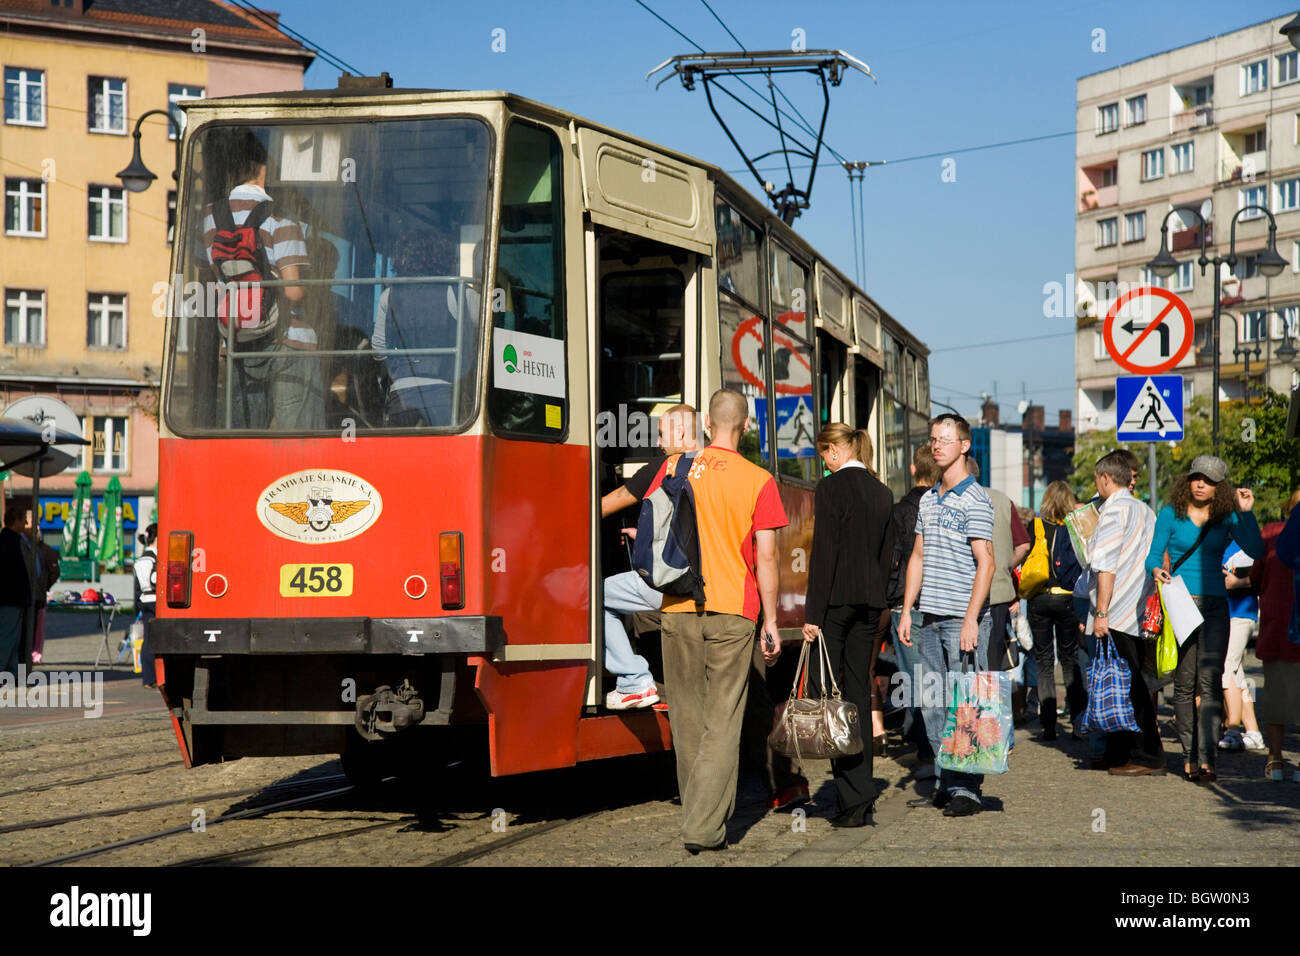 Passengers boarding a tram in town centre of Zabrze, Silesia. Poland. Stock Photo